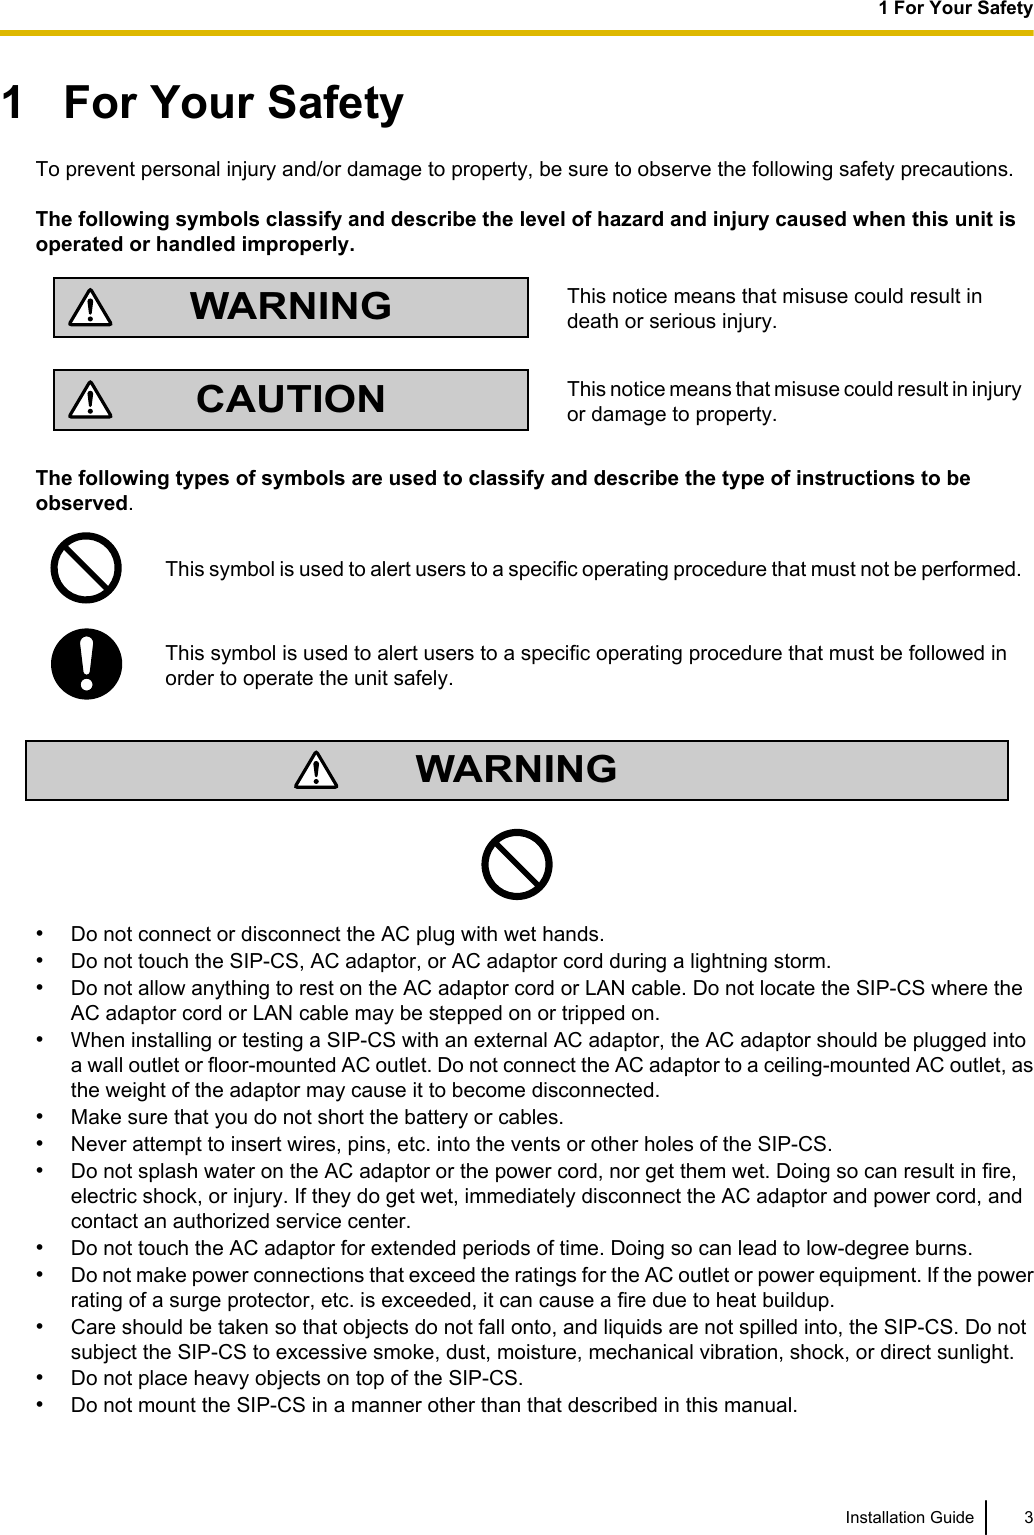 1   For Your SafetyTo prevent personal injury and/or damage to property, be sure to observe the following safety precautions.The following symbols classify and describe the level of hazard and injury caused when this unit isoperated or handled improperly.WARNINGThis notice means that misuse could result indeath or serious injury.CAUTIONThis notice means that misuse could result in injuryor damage to property.The following types of symbols are used to classify and describe the type of instructions to beobserved.This symbol is used to alert users to a specific operating procedure that must not be performed.This symbol is used to alert users to a specific operating procedure that must be followed inorder to operate the unit safely.WARNING•Do not connect or disconnect the AC plug with wet hands.•Do not touch the SIP-CS, AC adaptor, or AC adaptor cord during a lightning storm.•Do not allow anything to rest on the AC adaptor cord or LAN cable. Do not locate the SIP-CS where theAC adaptor cord or LAN cable may be stepped on or tripped on.•When installing or testing a SIP-CS with an external AC adaptor, the AC adaptor should be plugged intoa wall outlet or floor-mounted AC outlet. Do not connect the AC adaptor to a ceiling-mounted AC outlet, asthe weight of the adaptor may cause it to become disconnected.•Make sure that you do not short the battery or cables.•Never attempt to insert wires, pins, etc. into the vents or other holes of the SIP-CS.•Do not splash water on the AC adaptor or the power cord, nor get them wet. Doing so can result in fire,electric shock, or injury. If they do get wet, immediately disconnect the AC adaptor and power cord, andcontact an authorized service center.•Do not touch the AC adaptor for extended periods of time. Doing so can lead to low-degree burns.•Do not make power connections that exceed the ratings for the AC outlet or power equipment. If the powerrating of a surge protector, etc. is exceeded, it can cause a fire due to heat buildup.•Care should be taken so that objects do not fall onto, and liquids are not spilled into, the SIP-CS. Do notsubject the SIP-CS to excessive smoke, dust, moisture, mechanical vibration, shock, or direct sunlight.•Do not place heavy objects on top of the SIP-CS.•Do not mount the SIP-CS in a manner other than that described in this manual.Installation Guide 31 For Your Safety